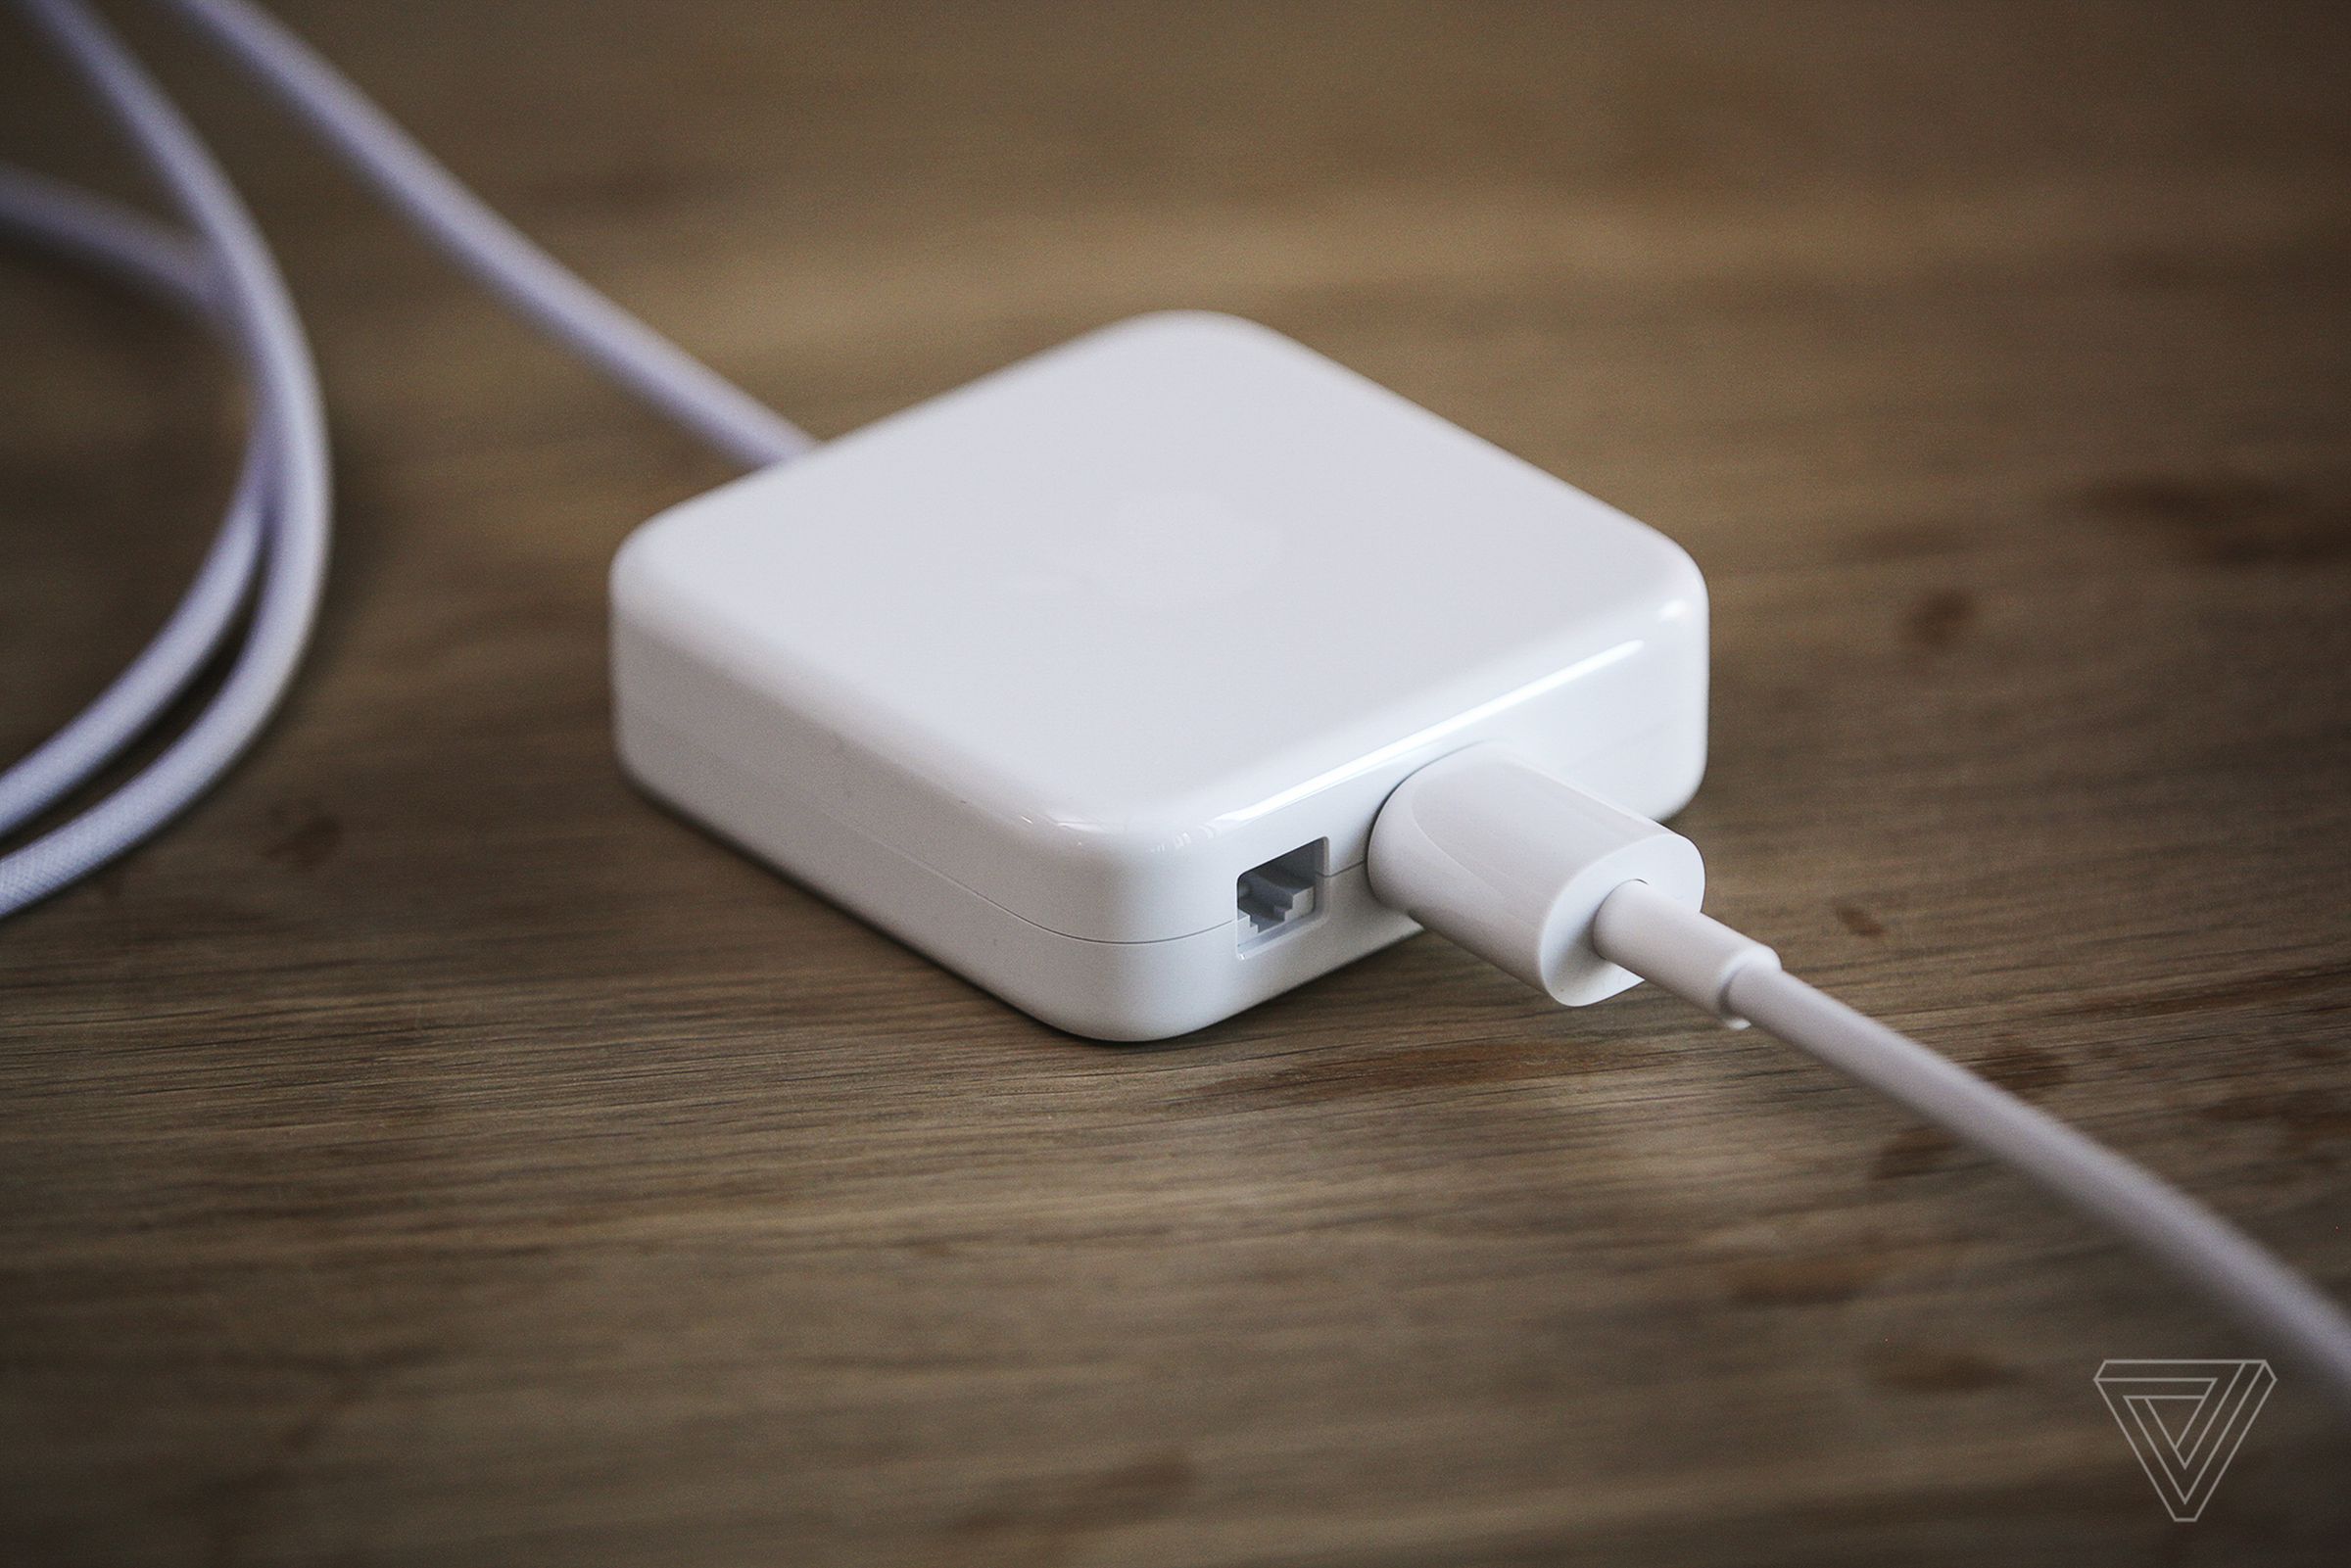 The power adapter is now external, like a MacBook, but it conveniently includes an Ethernet port